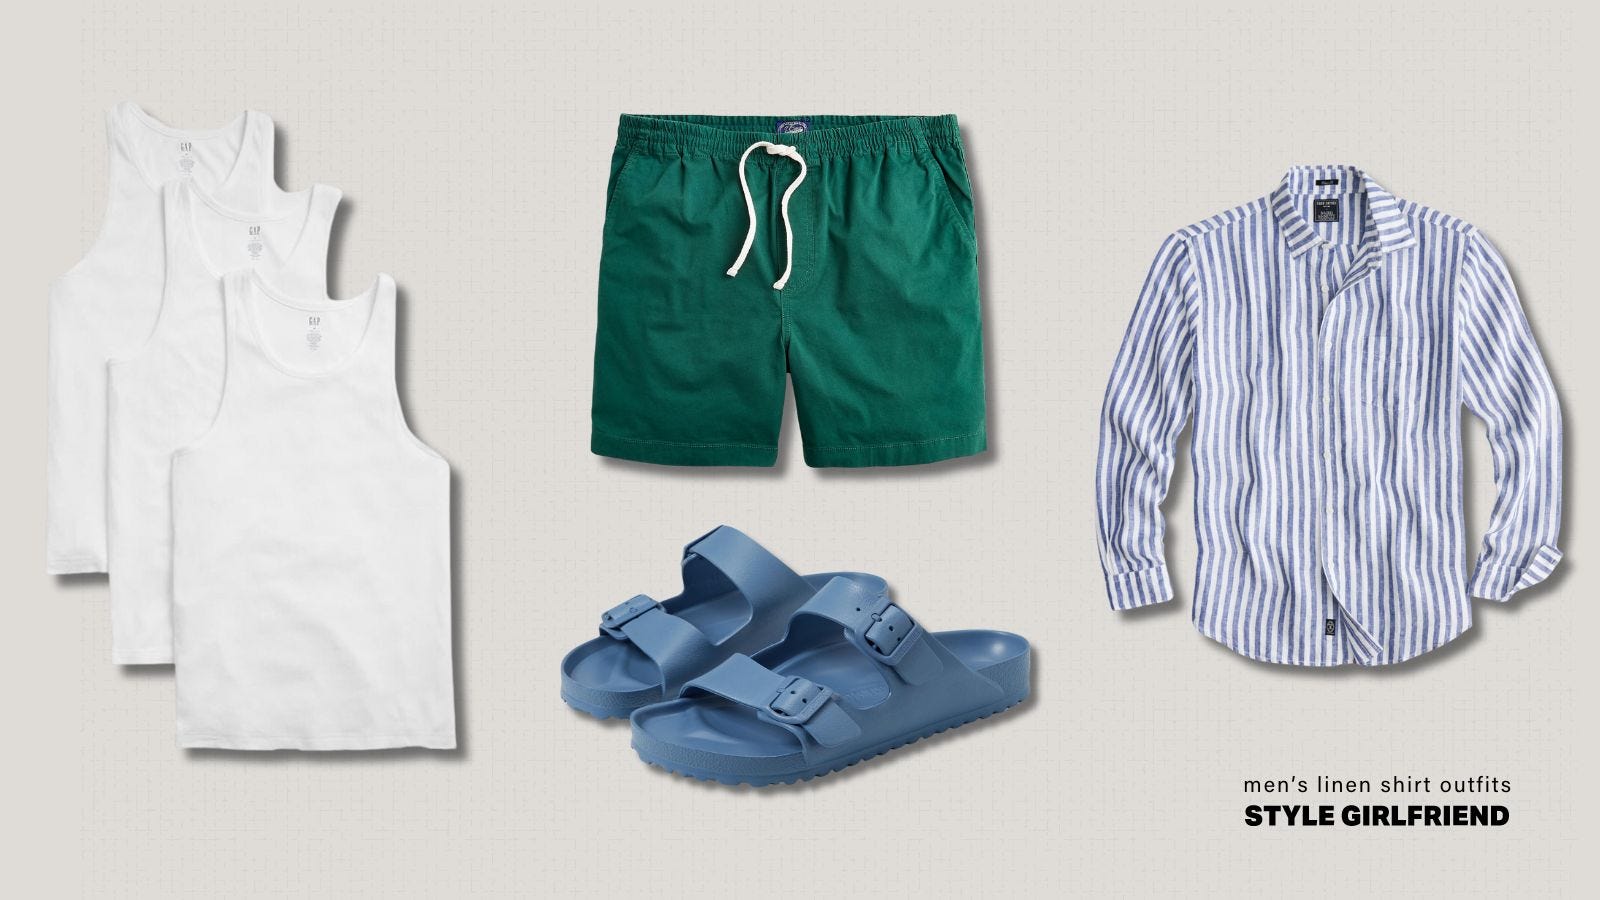 men's casual linen shirt outfit with green shorts and birkenstock sandals